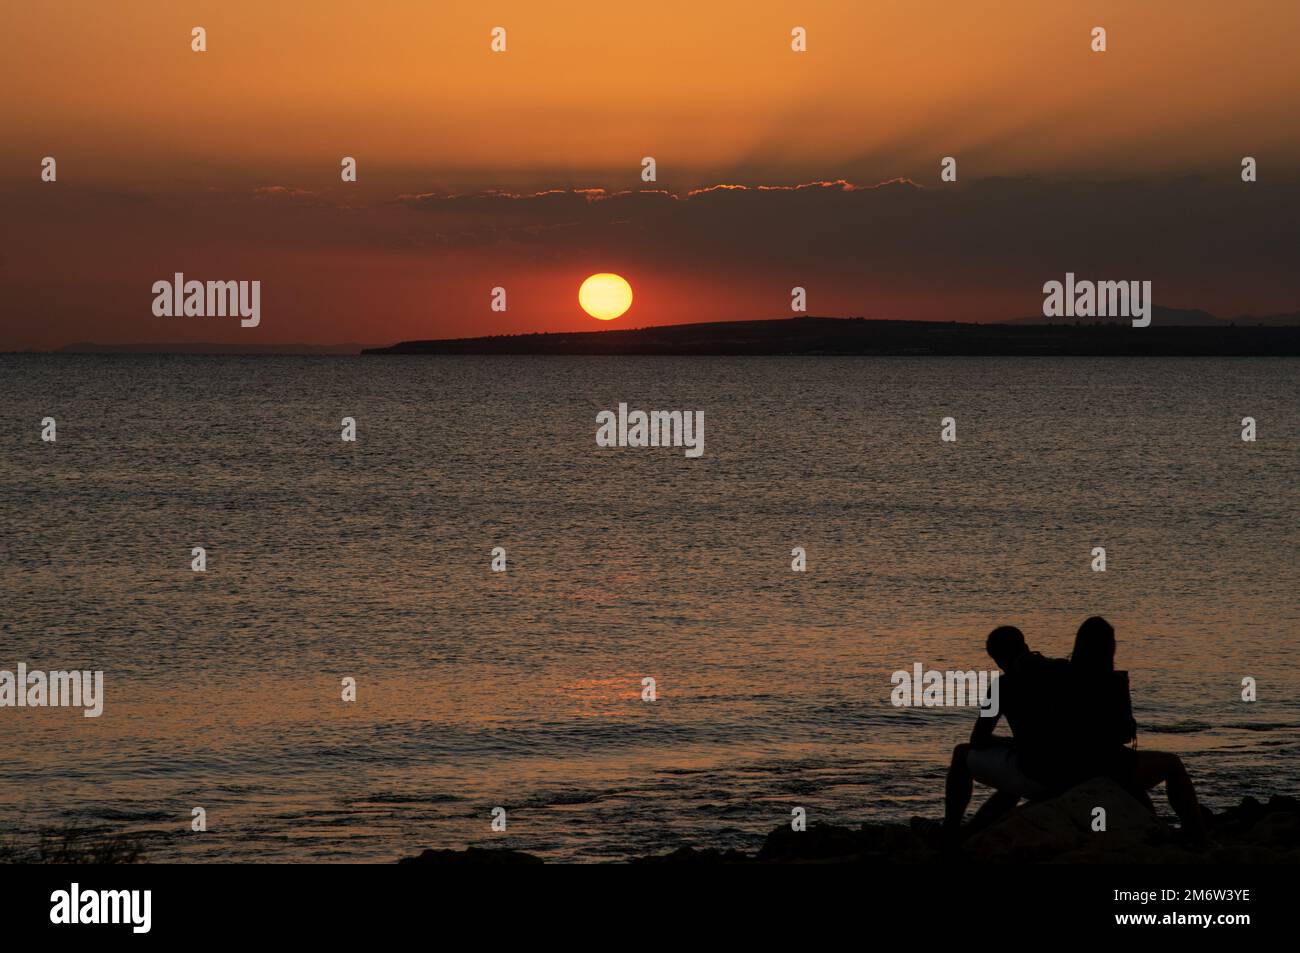 Silhouette of young couple enjoying beautiful sunset at the beach. Romantic moment human relationship Stock Photo